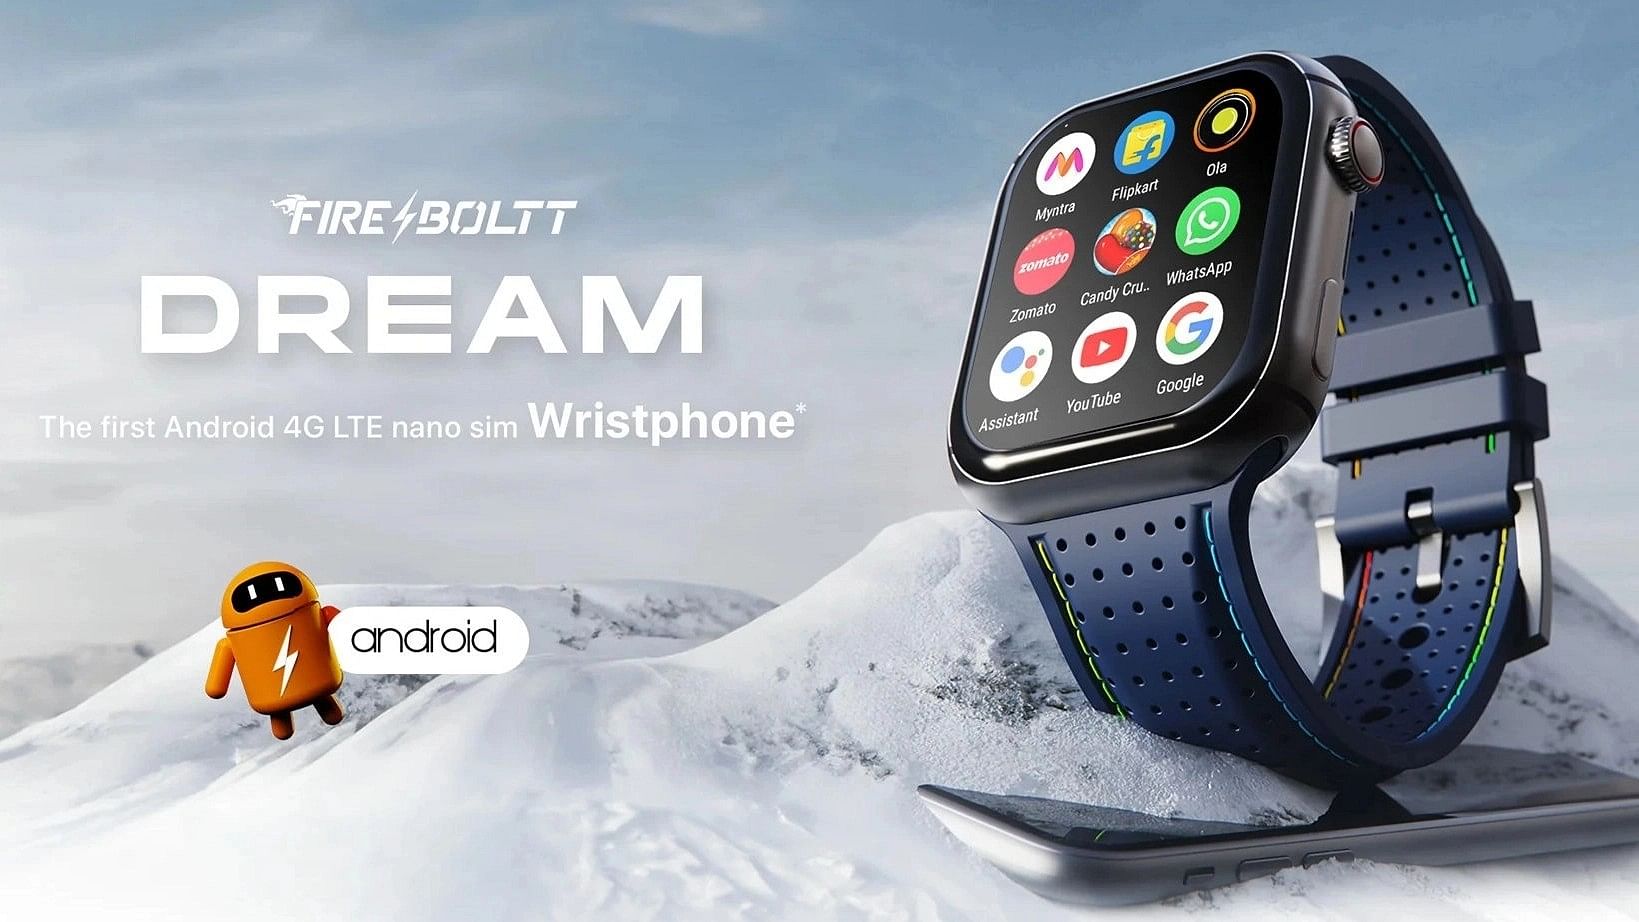 <div class="paragraphs"><p>Fire-Boltt Dream 'Wristphone' is launched in India recently.</p></div>